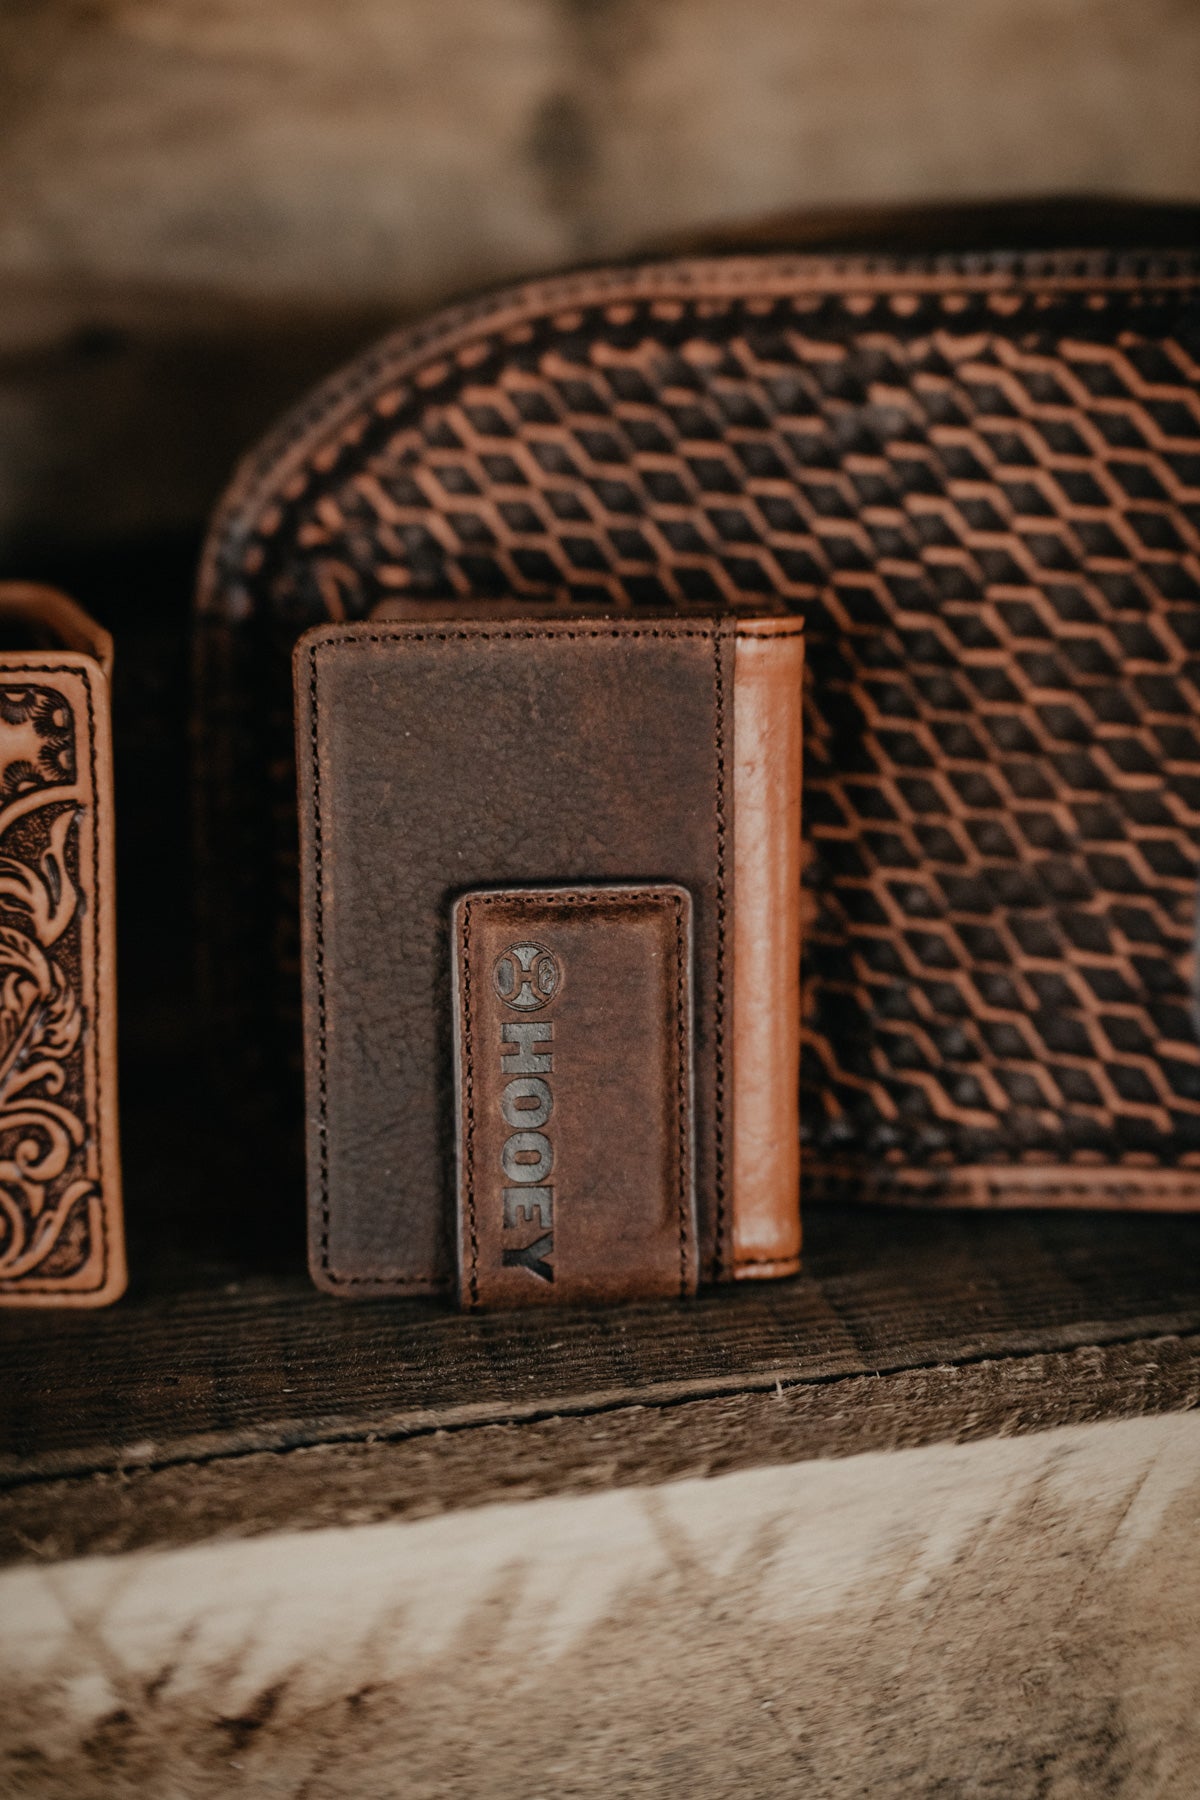 'Grayson' Hooey Distressed Brown Bifold Money Clip Wallet with Tooled Leather Overlay